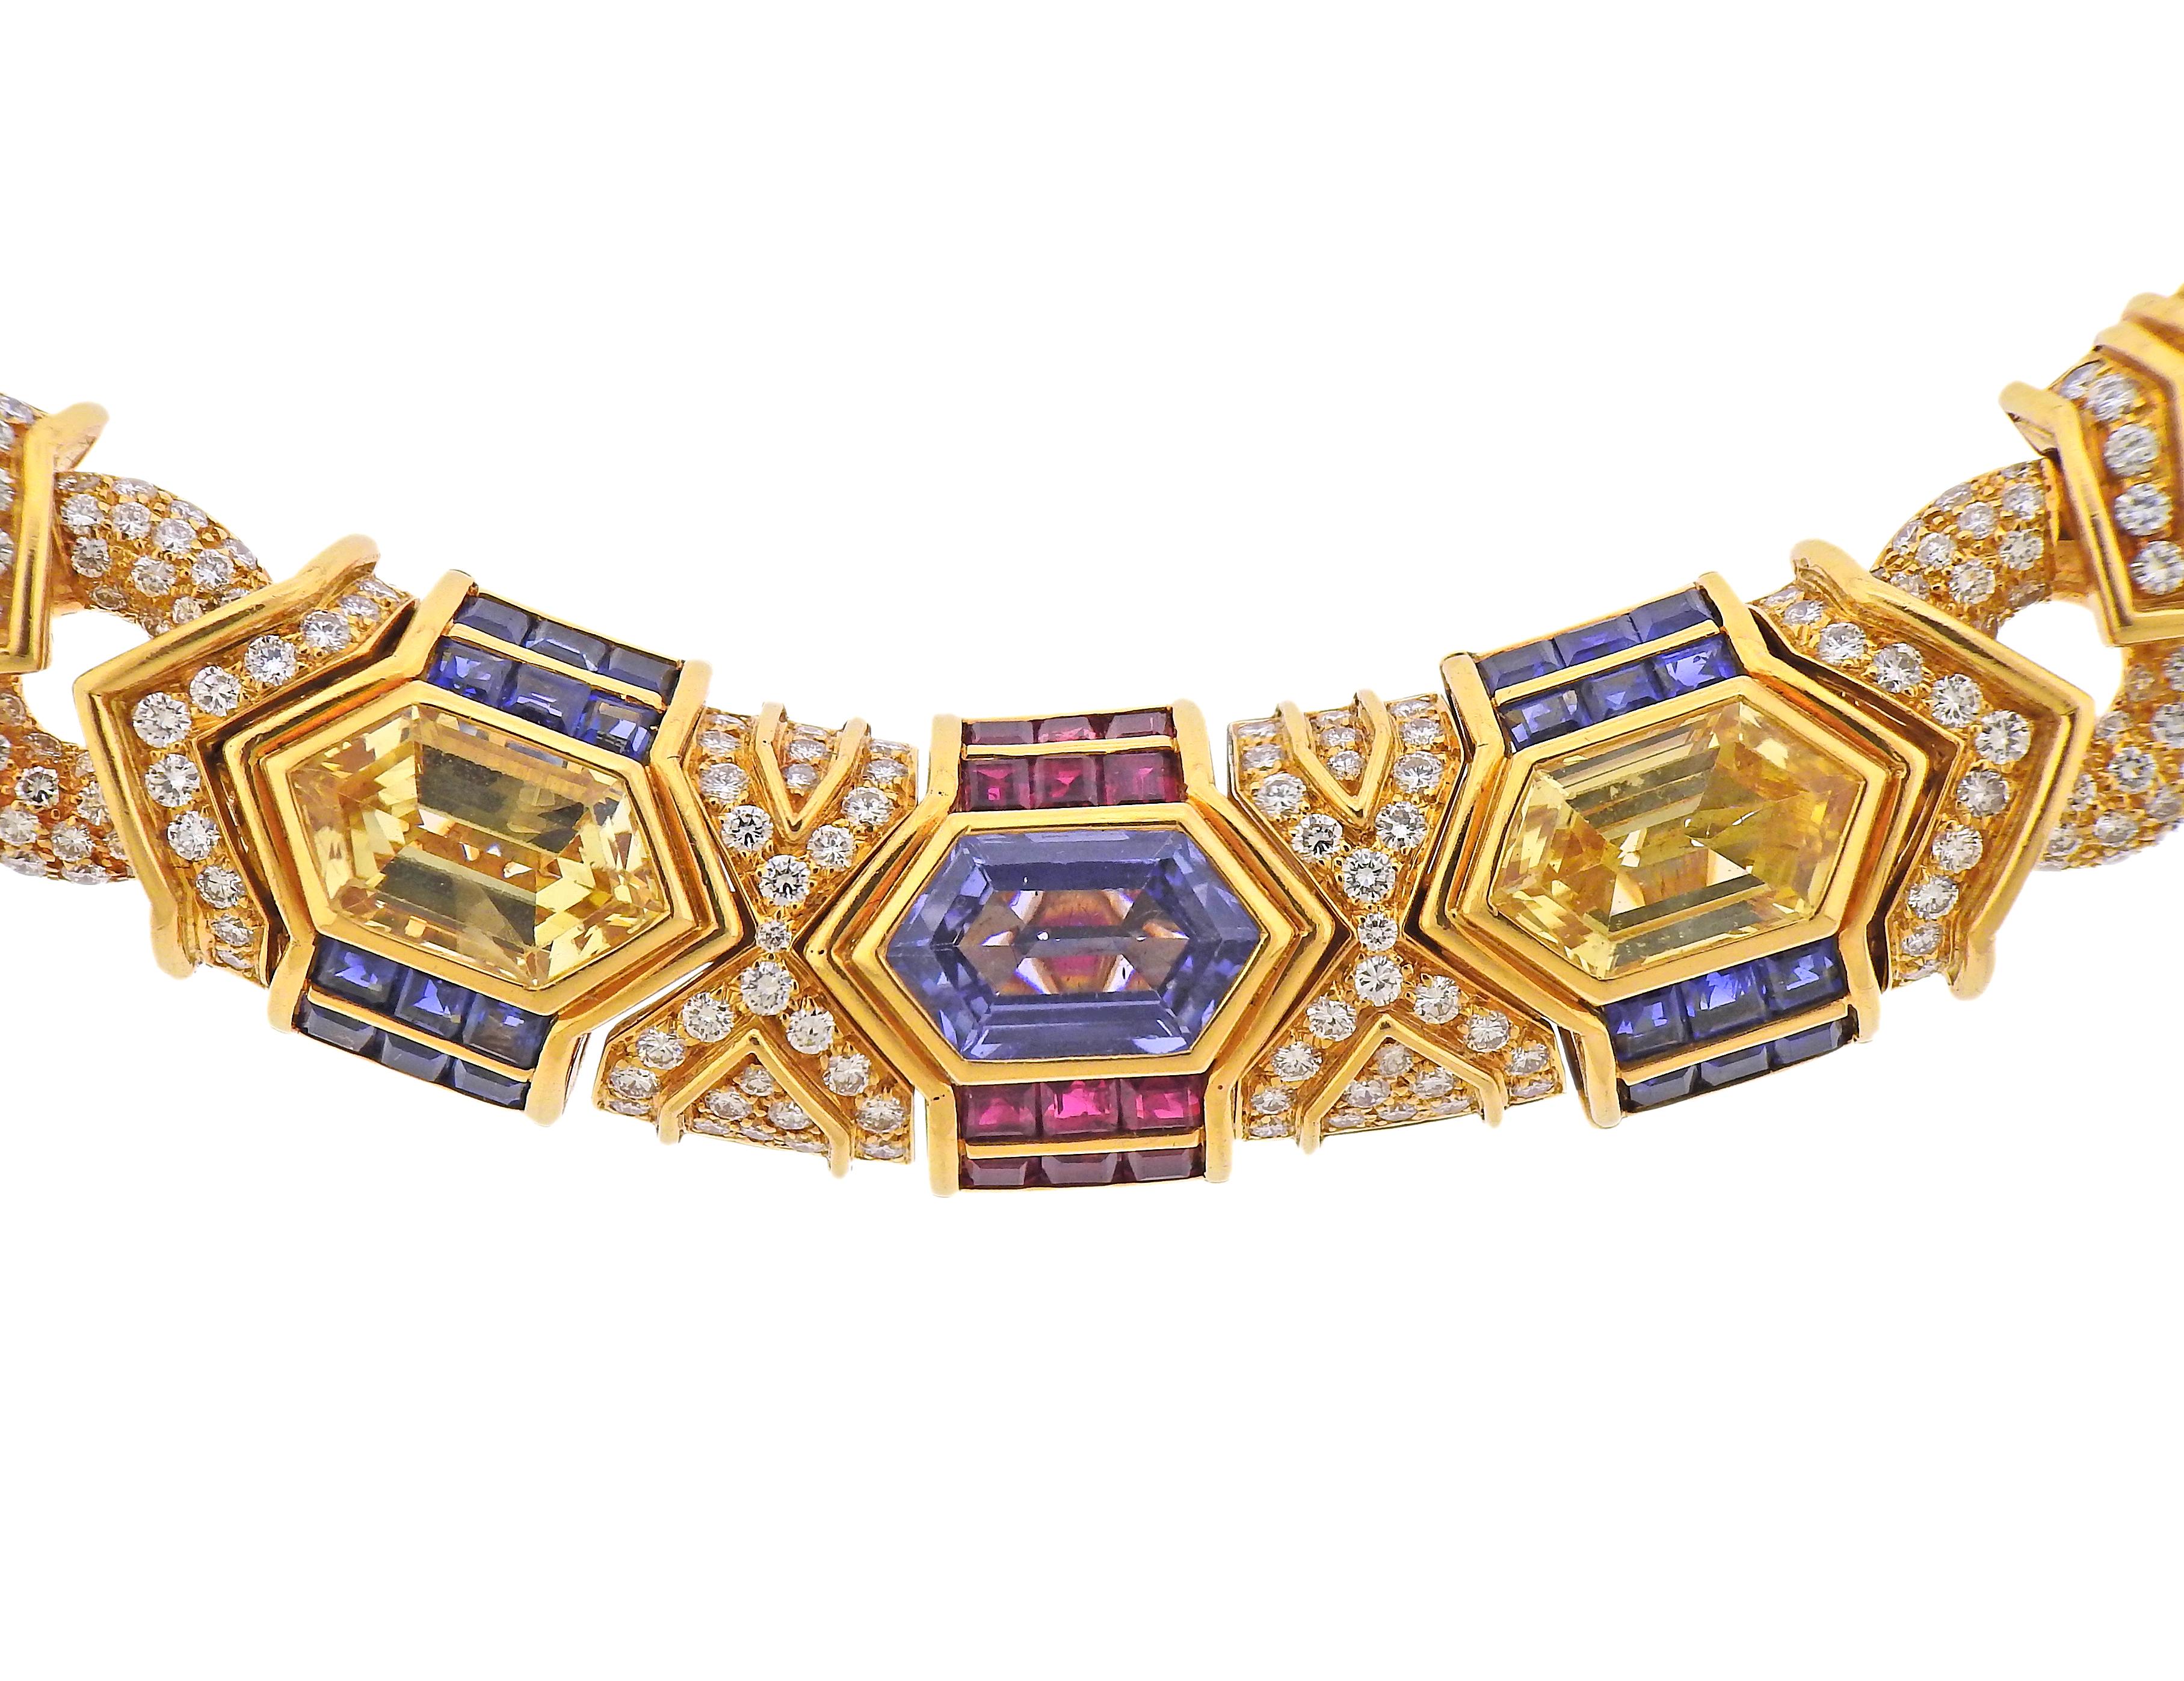 1980s Bvlgari necklace, in 18k gold, with blue and yellow sapphires - 13.03ctw, rubies and 5.94ctw in diamonds. Necklace is 16.5